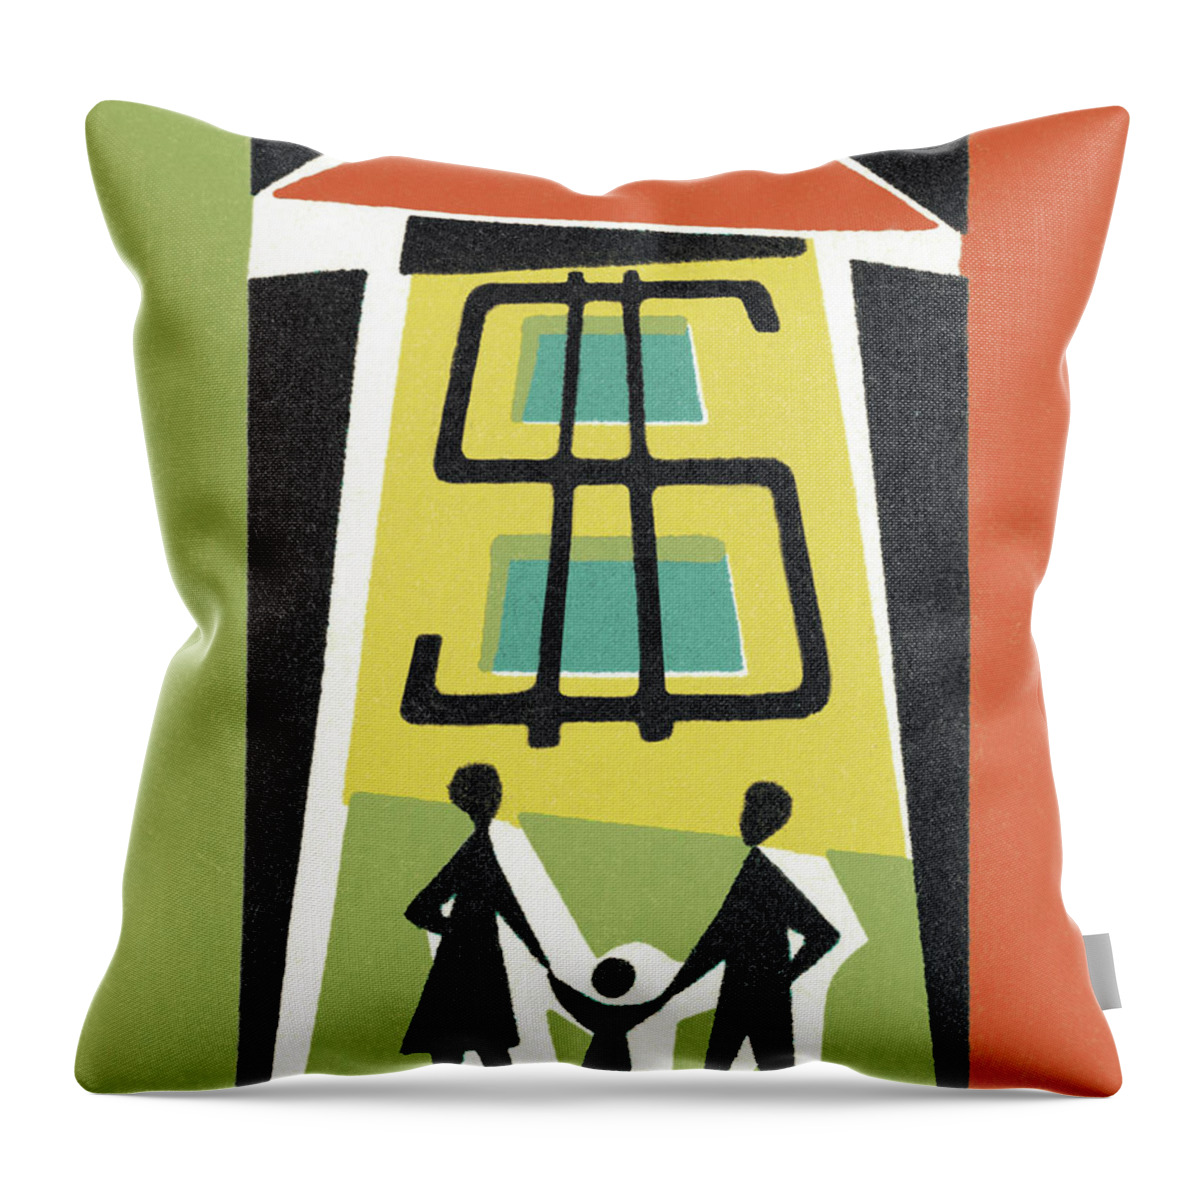 Affection Throw Pillow featuring the drawing Family House Budget by CSA Images